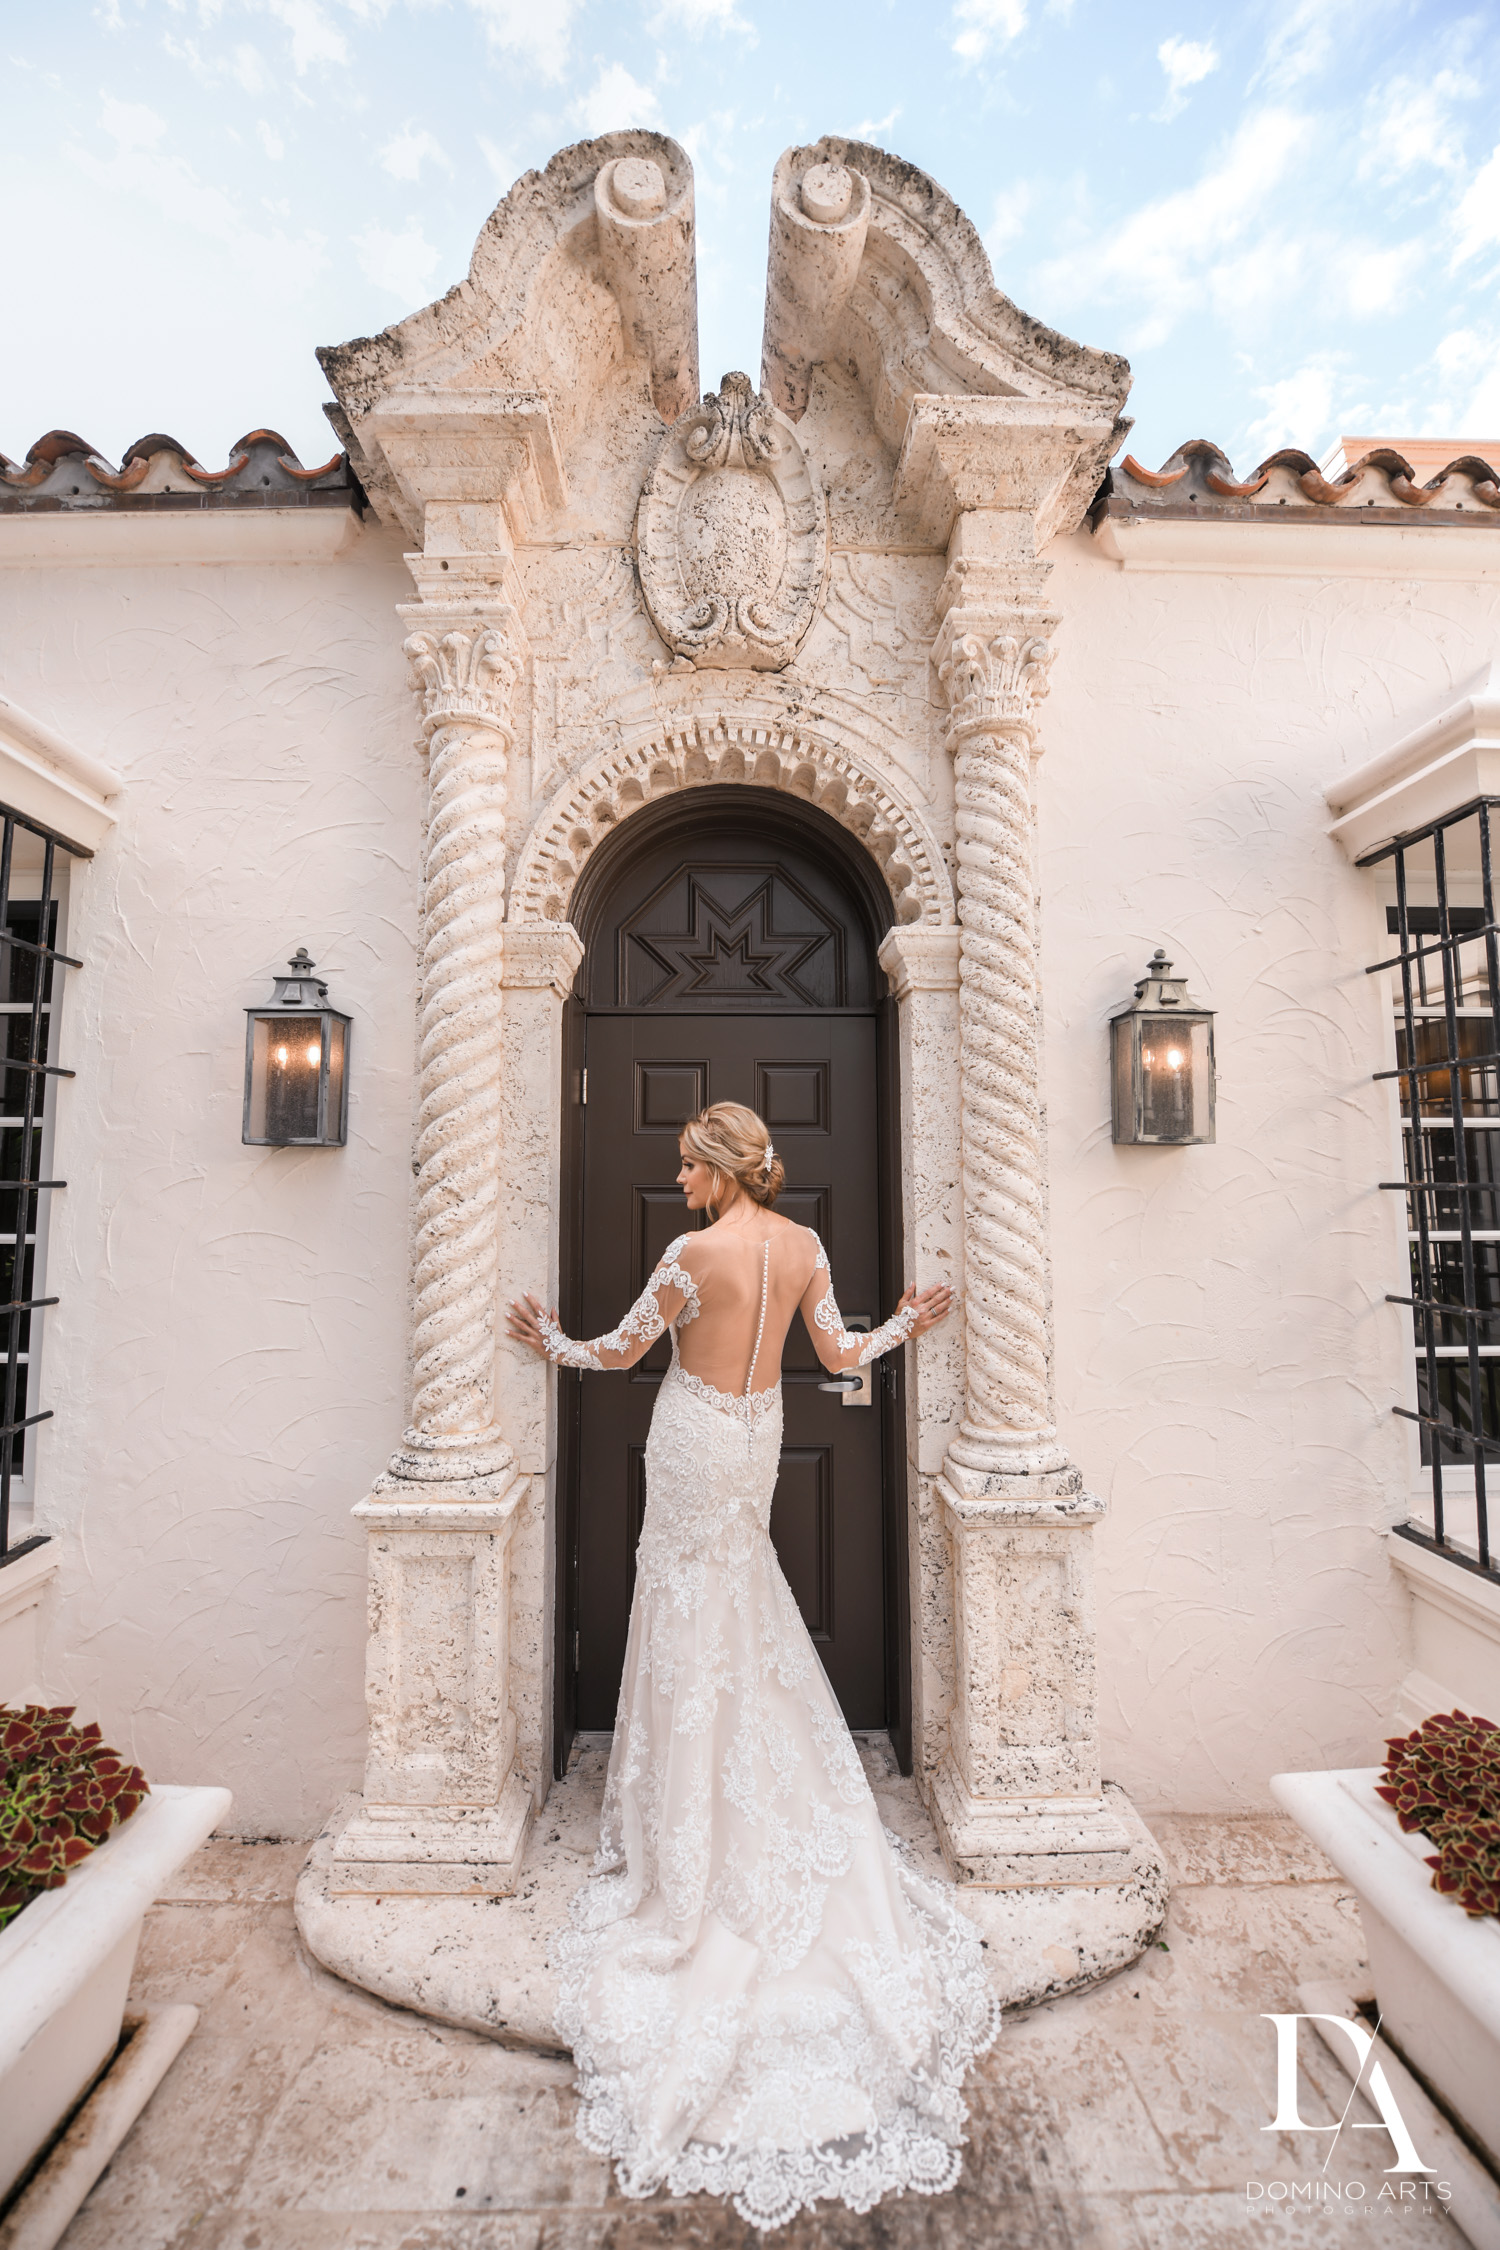 Classic & Elegant Wedding Photography at Fisher Island Miami by Domino Arts Photography